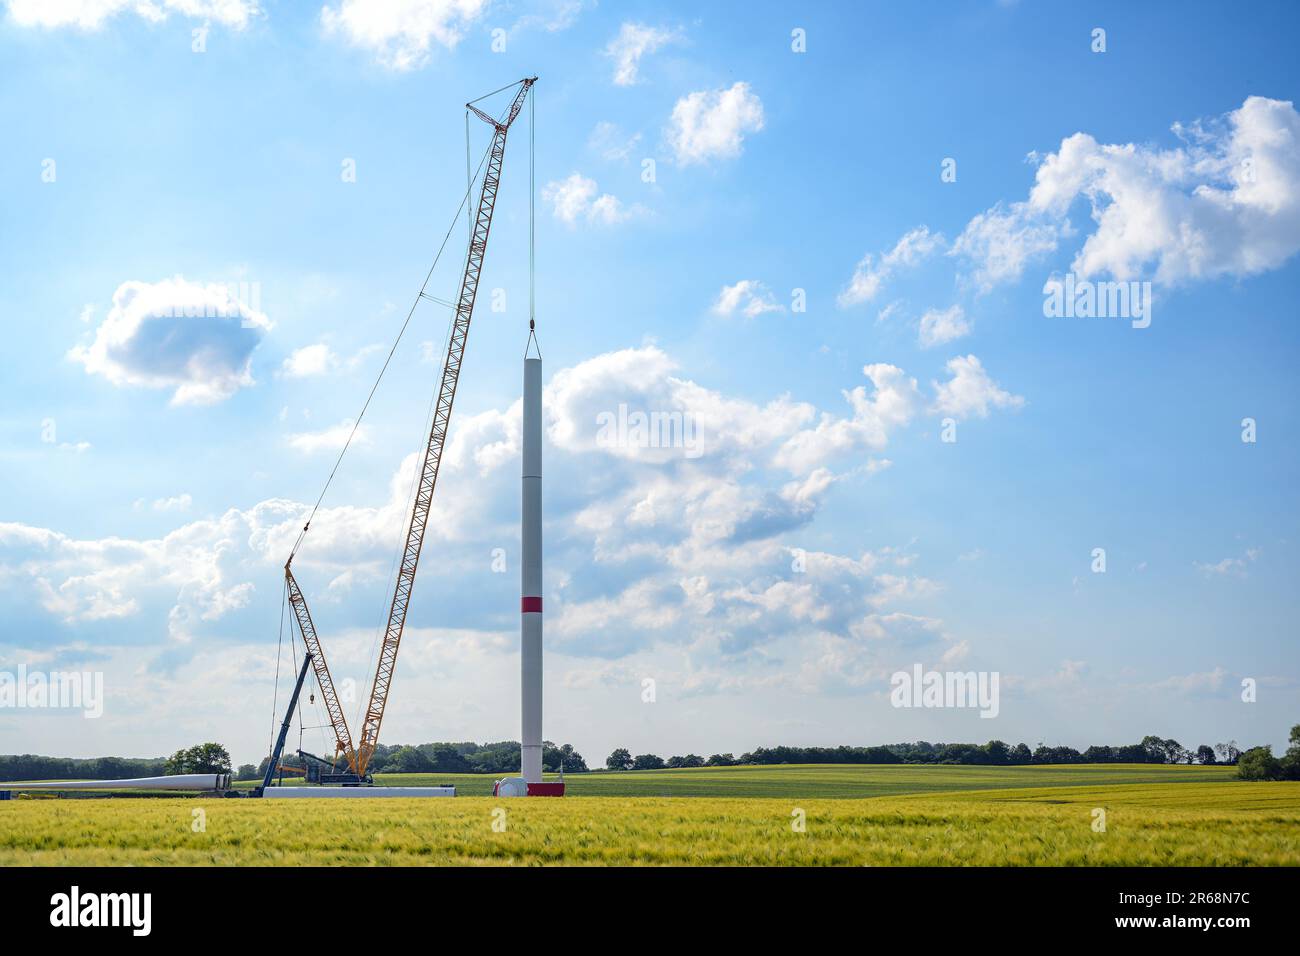 Construction site of a wind turbine, tall crane installing a tube on the tower, nacelle, rotor hub and blades lying still on the ground, renewable ene Stock Photo